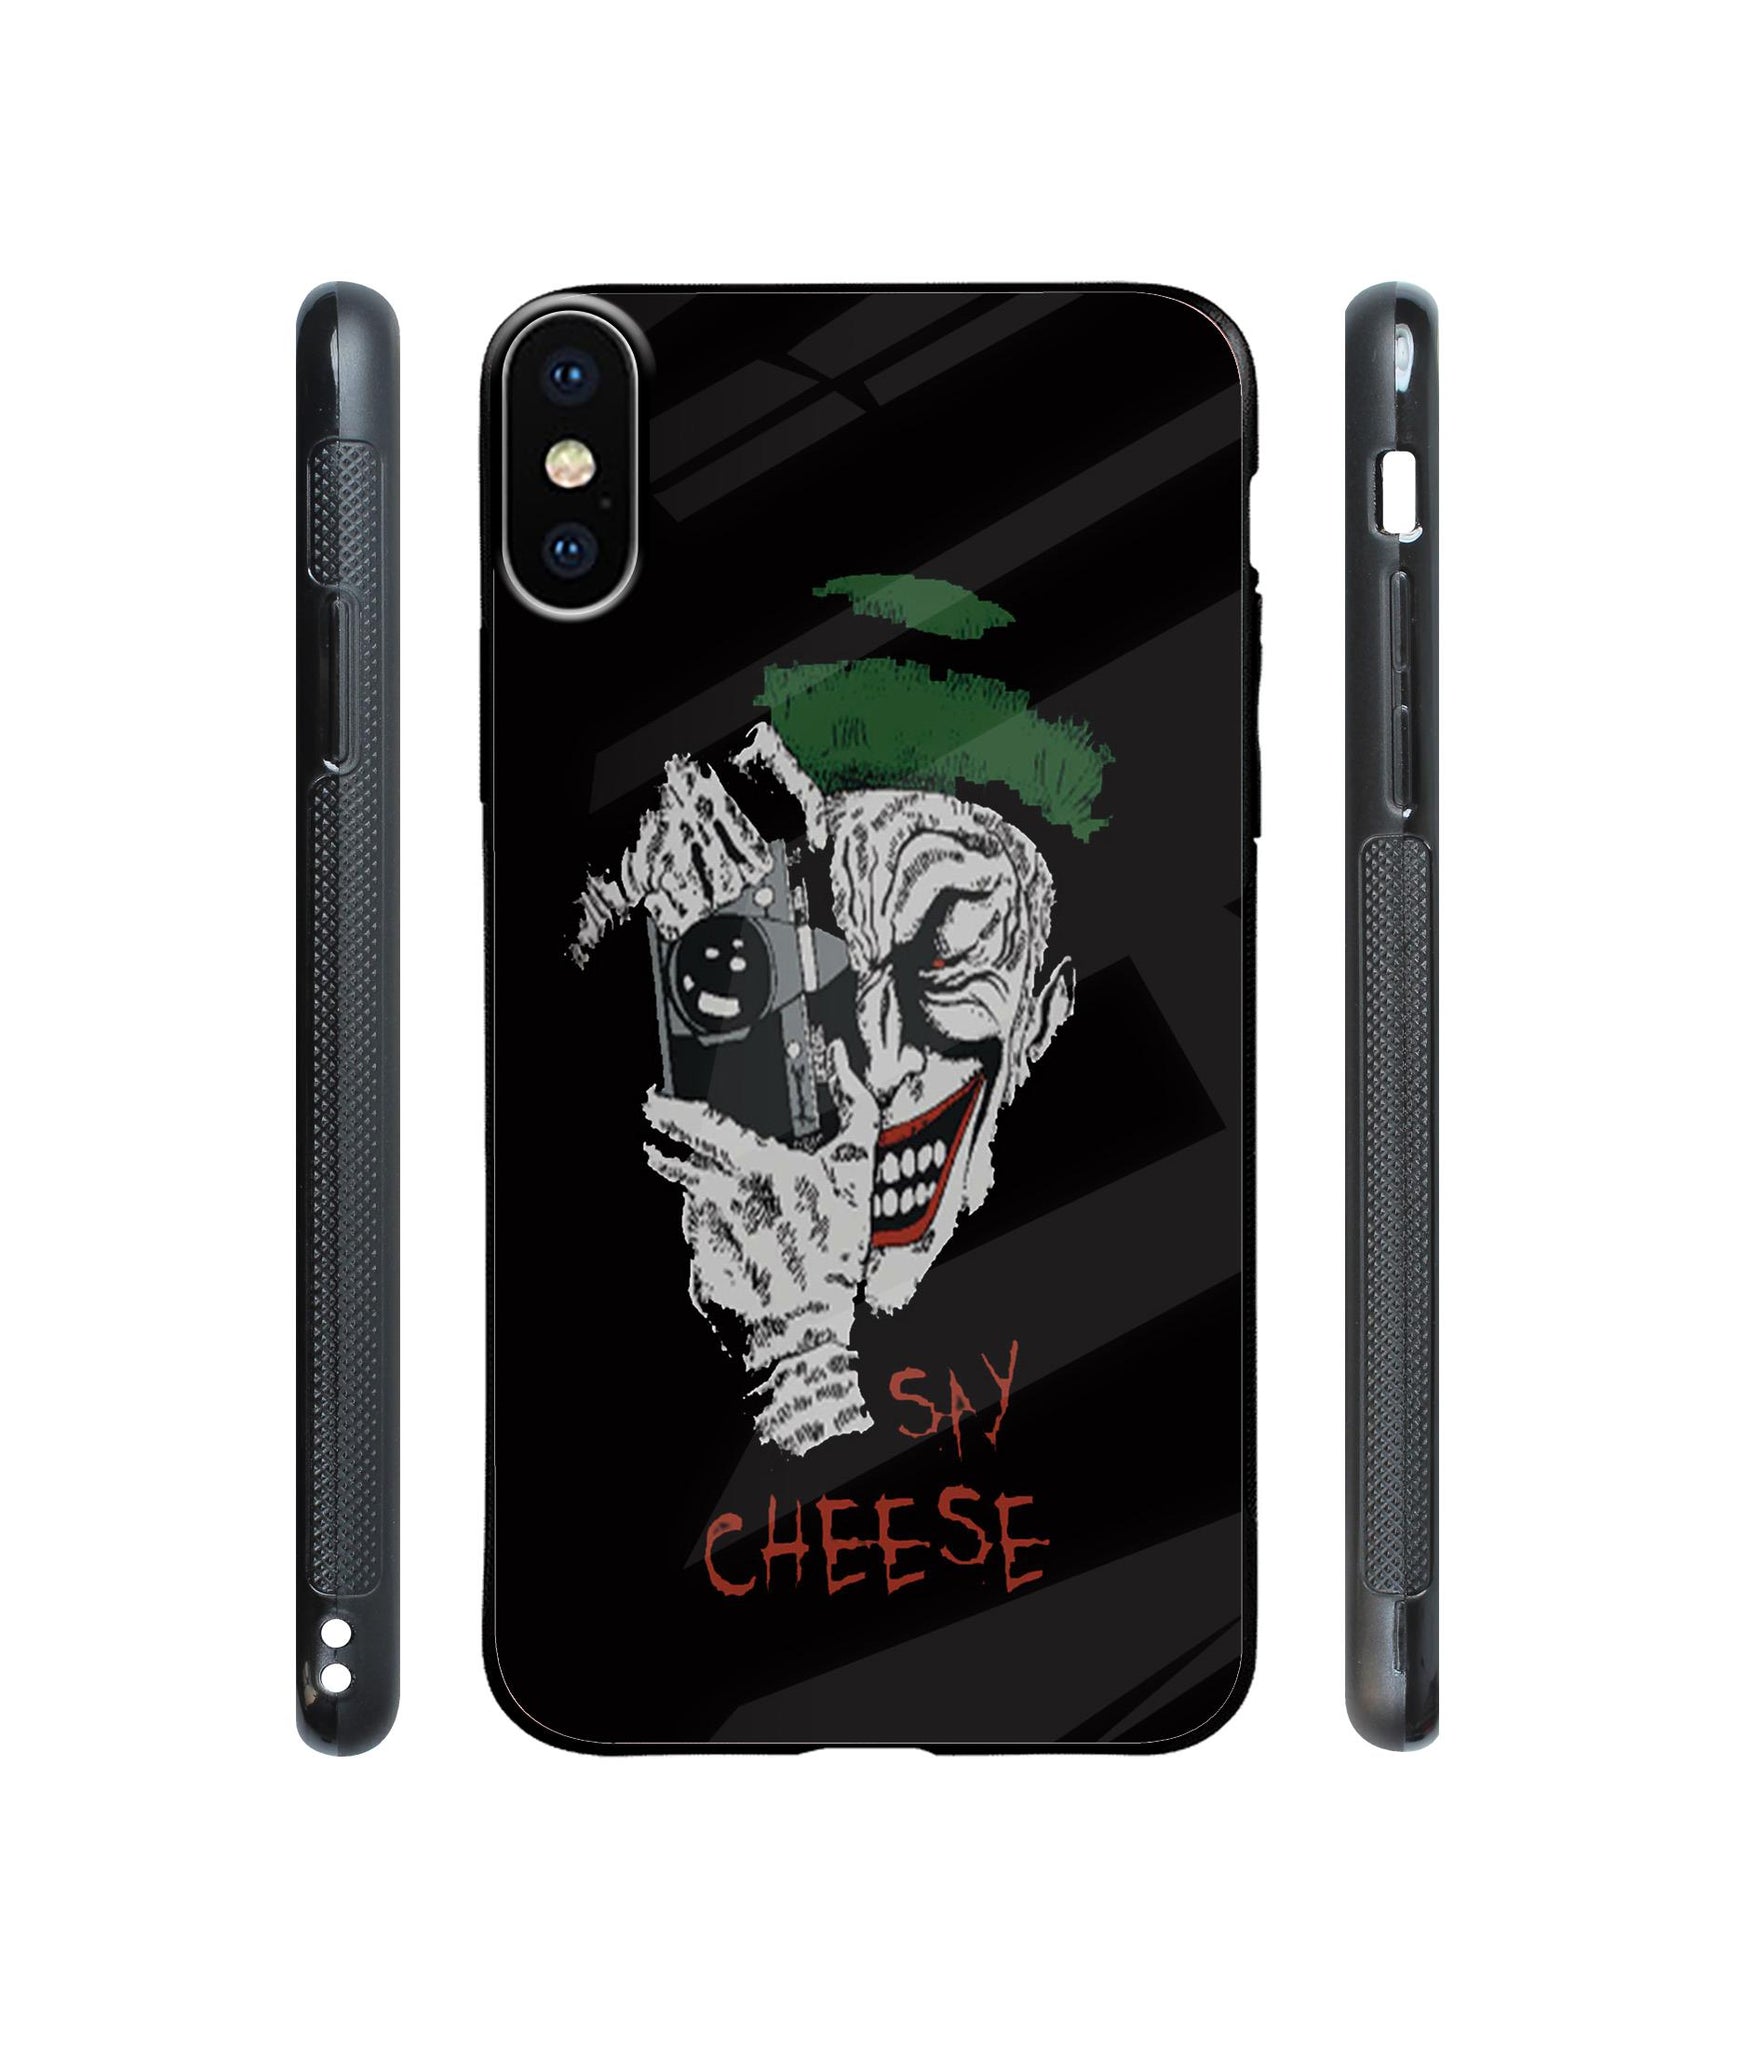 Joker Say Cheese Designer Printed Glass Cover for Apple iPhone X / Xs